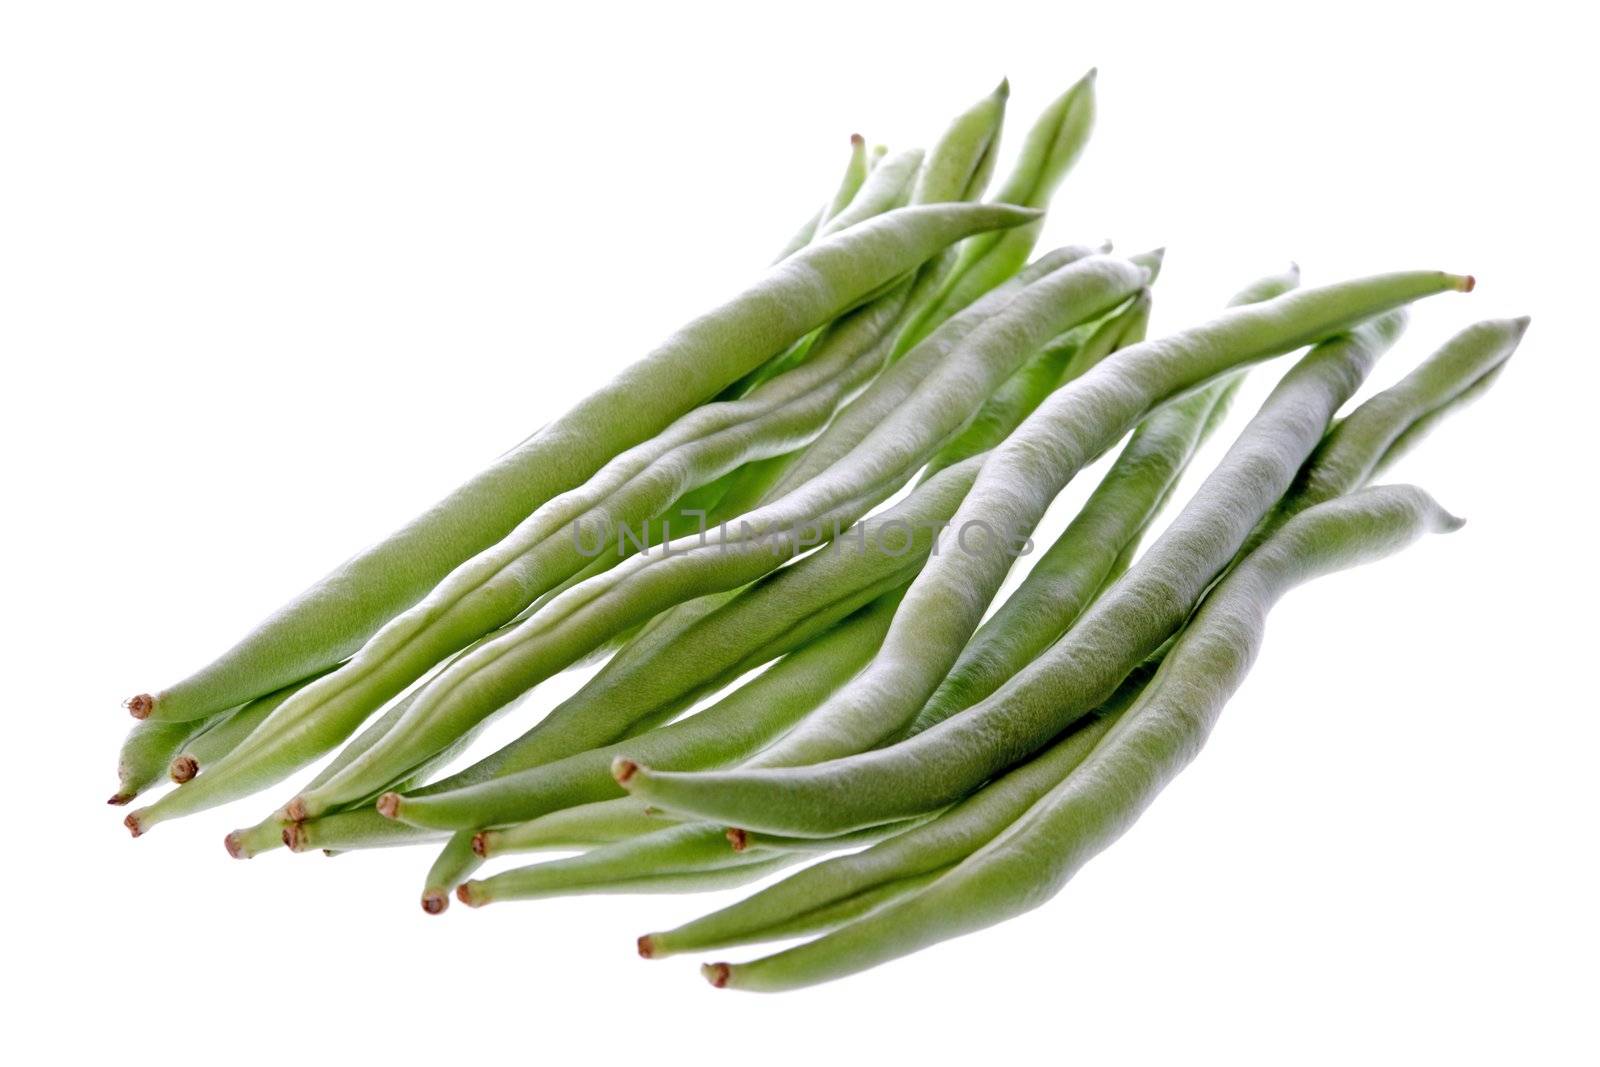 Isolated image of french beans.